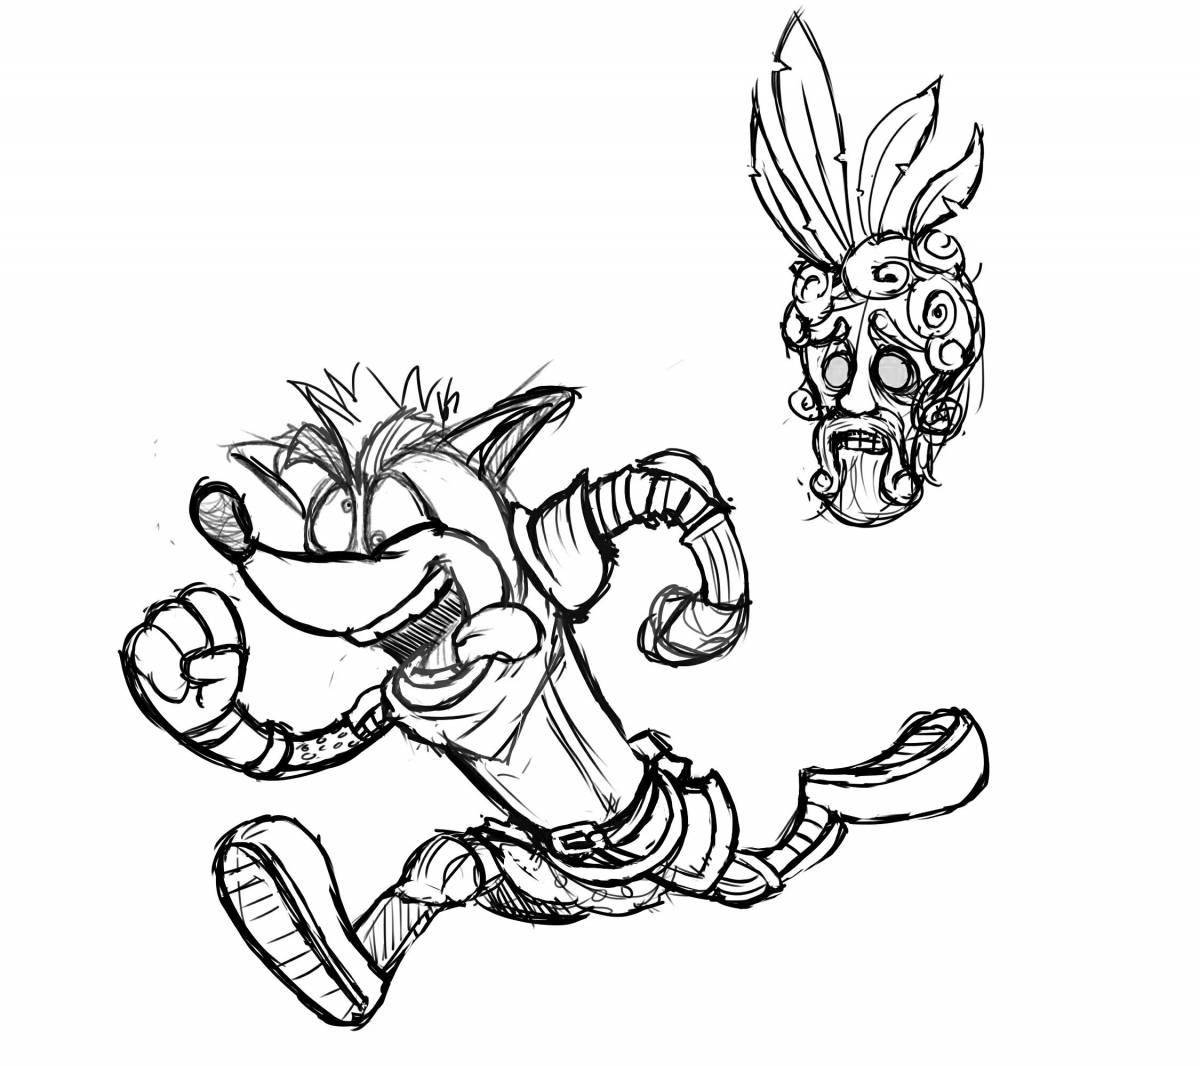 Color-lively crash bandicoot coloring page